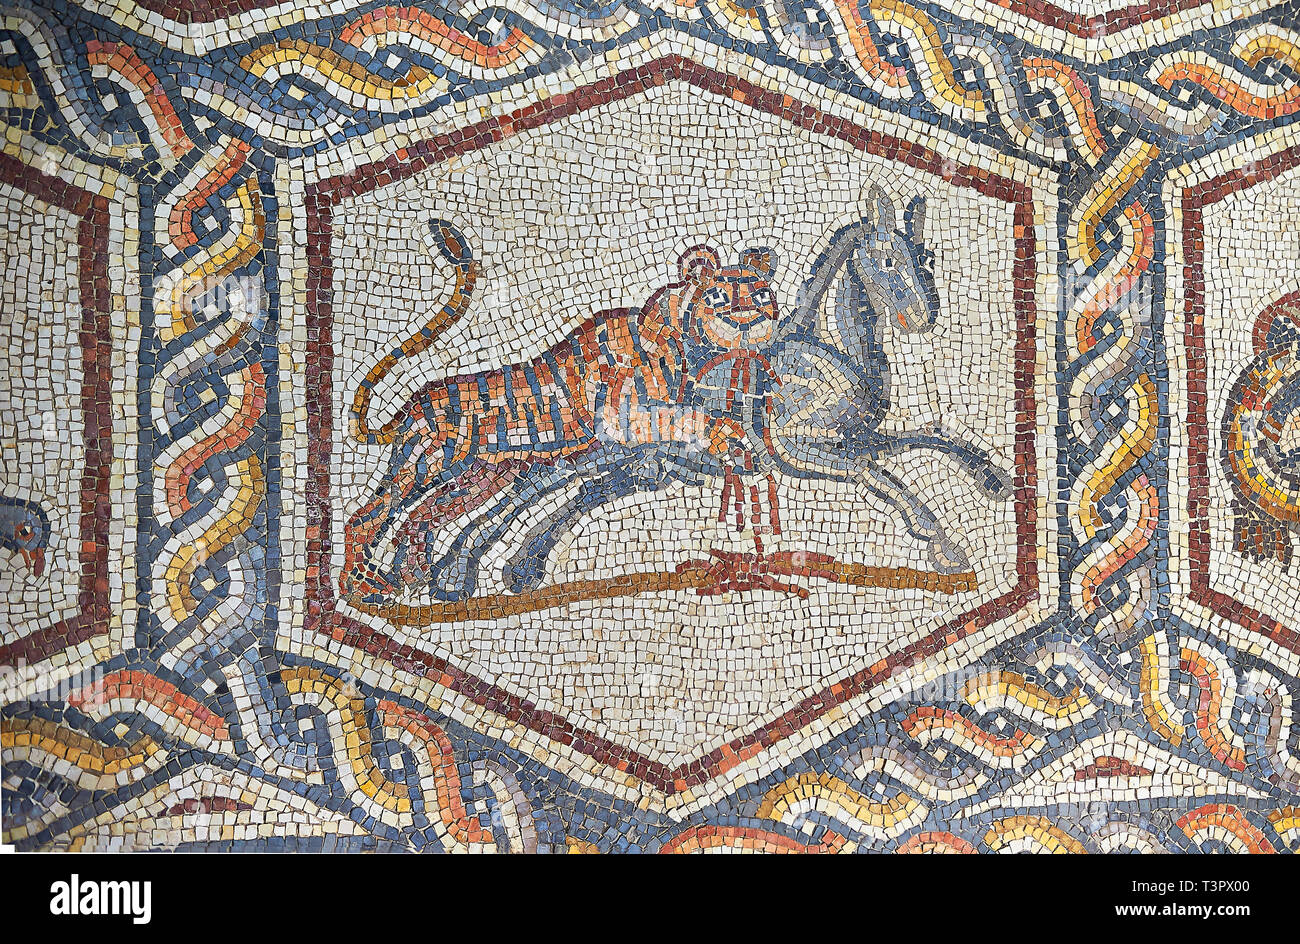 A tiger hunting from the 3rd century Roman mosaic villa floor from Lod, near Tel Aviv, Israel. The Roman floor mosaic of Lod is the largest and best p Stock Photo